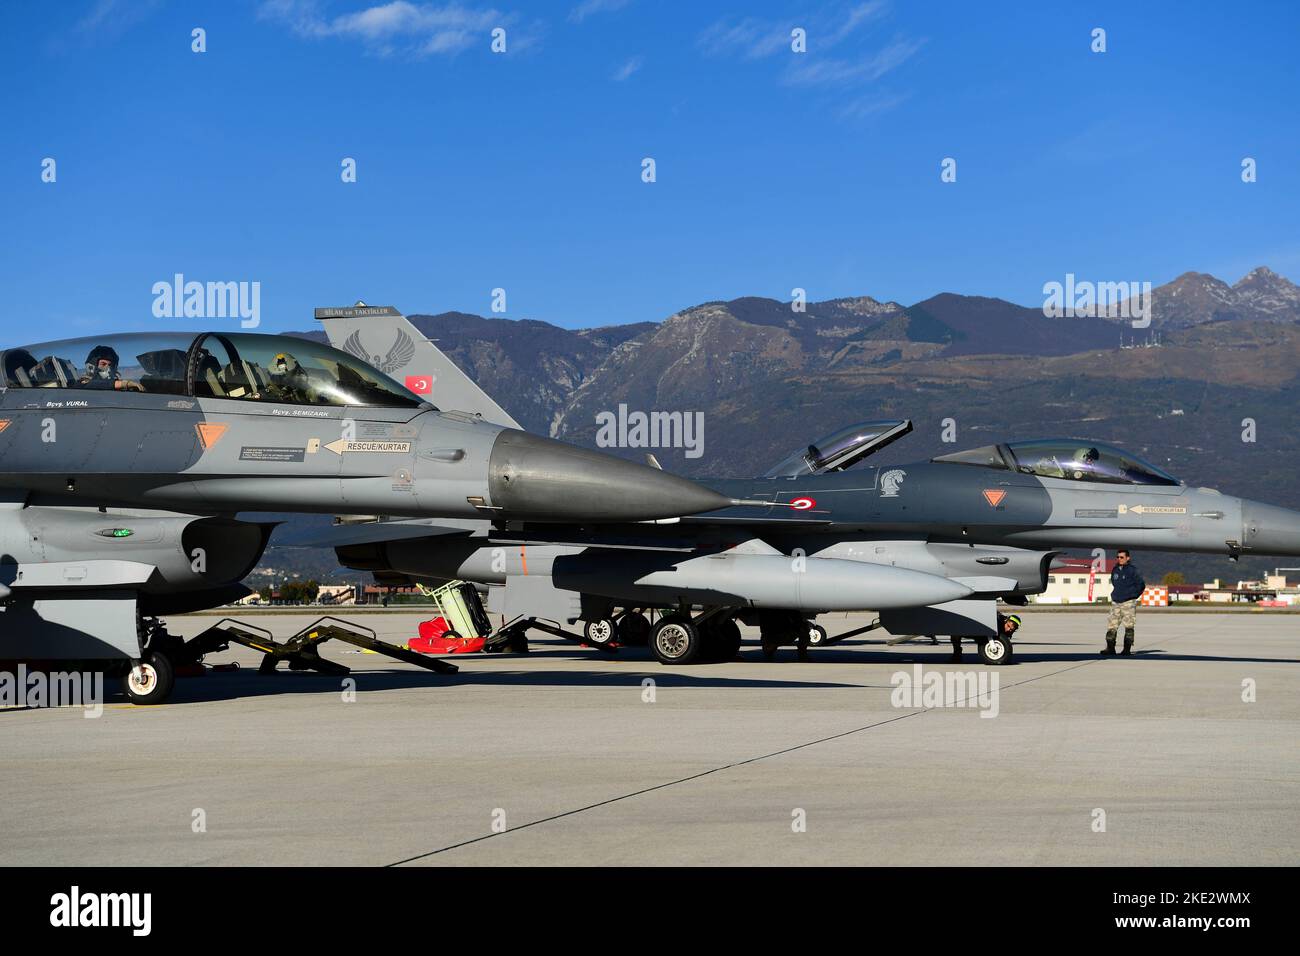 F-16 Fighting Falcons assigned to the Turkish Air Force prepare for take-off during Exercise Poggio Dart at Aviano Air Base, Italy, Nov. 8, 2022. The exercise optimized the integration between participants and strengthened interoperability between allied air forces during joint operations. (U.S. Air Force photo by Senior Airman Noah Sudolcan) Stock Photo